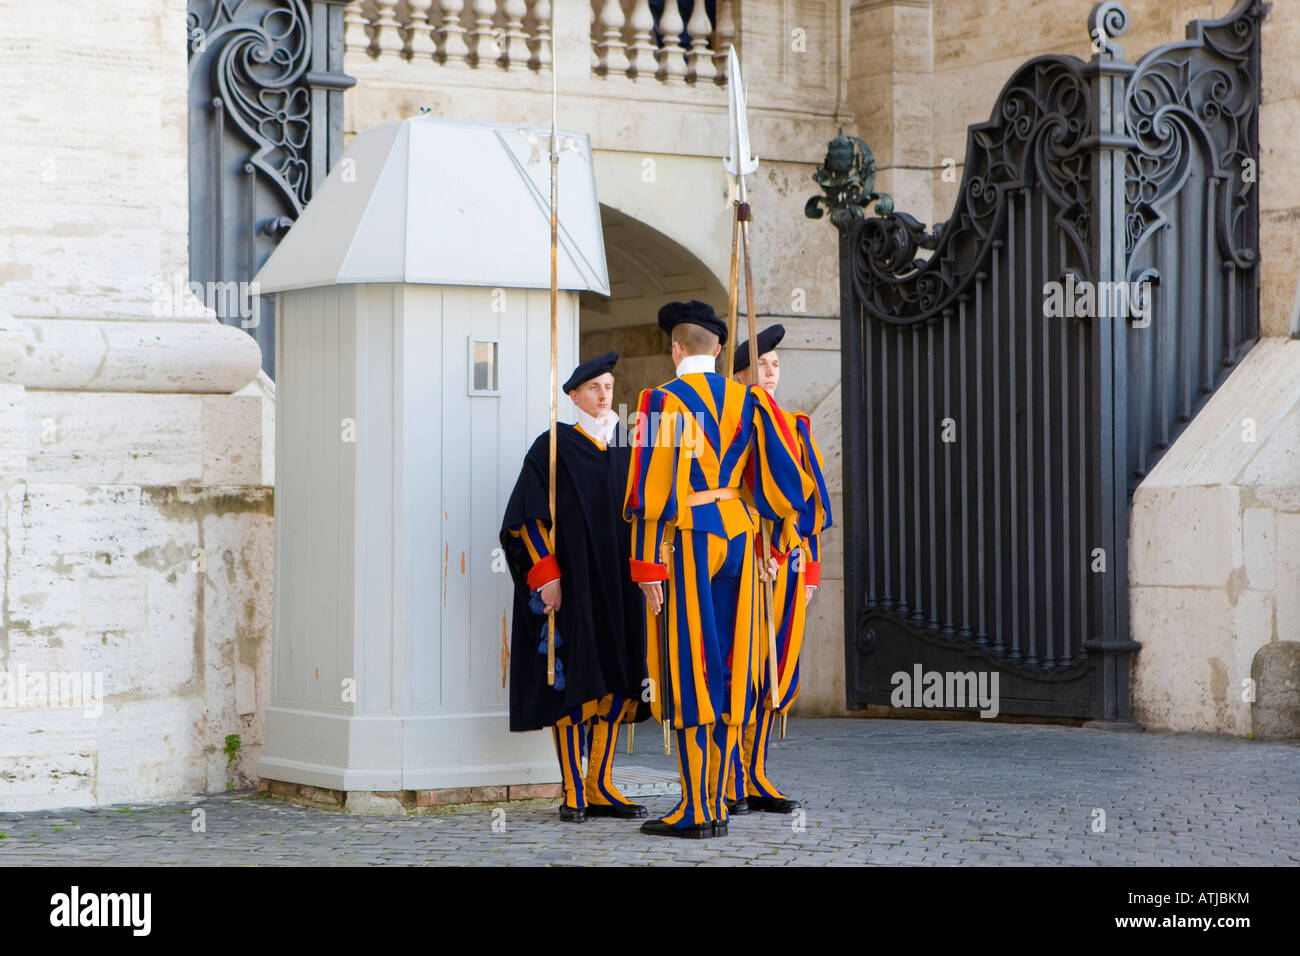 The Papal Swiss Guard at the changing of the Guard, Vatican City, Holy See, Rome / Roma, Italy Stock Photo